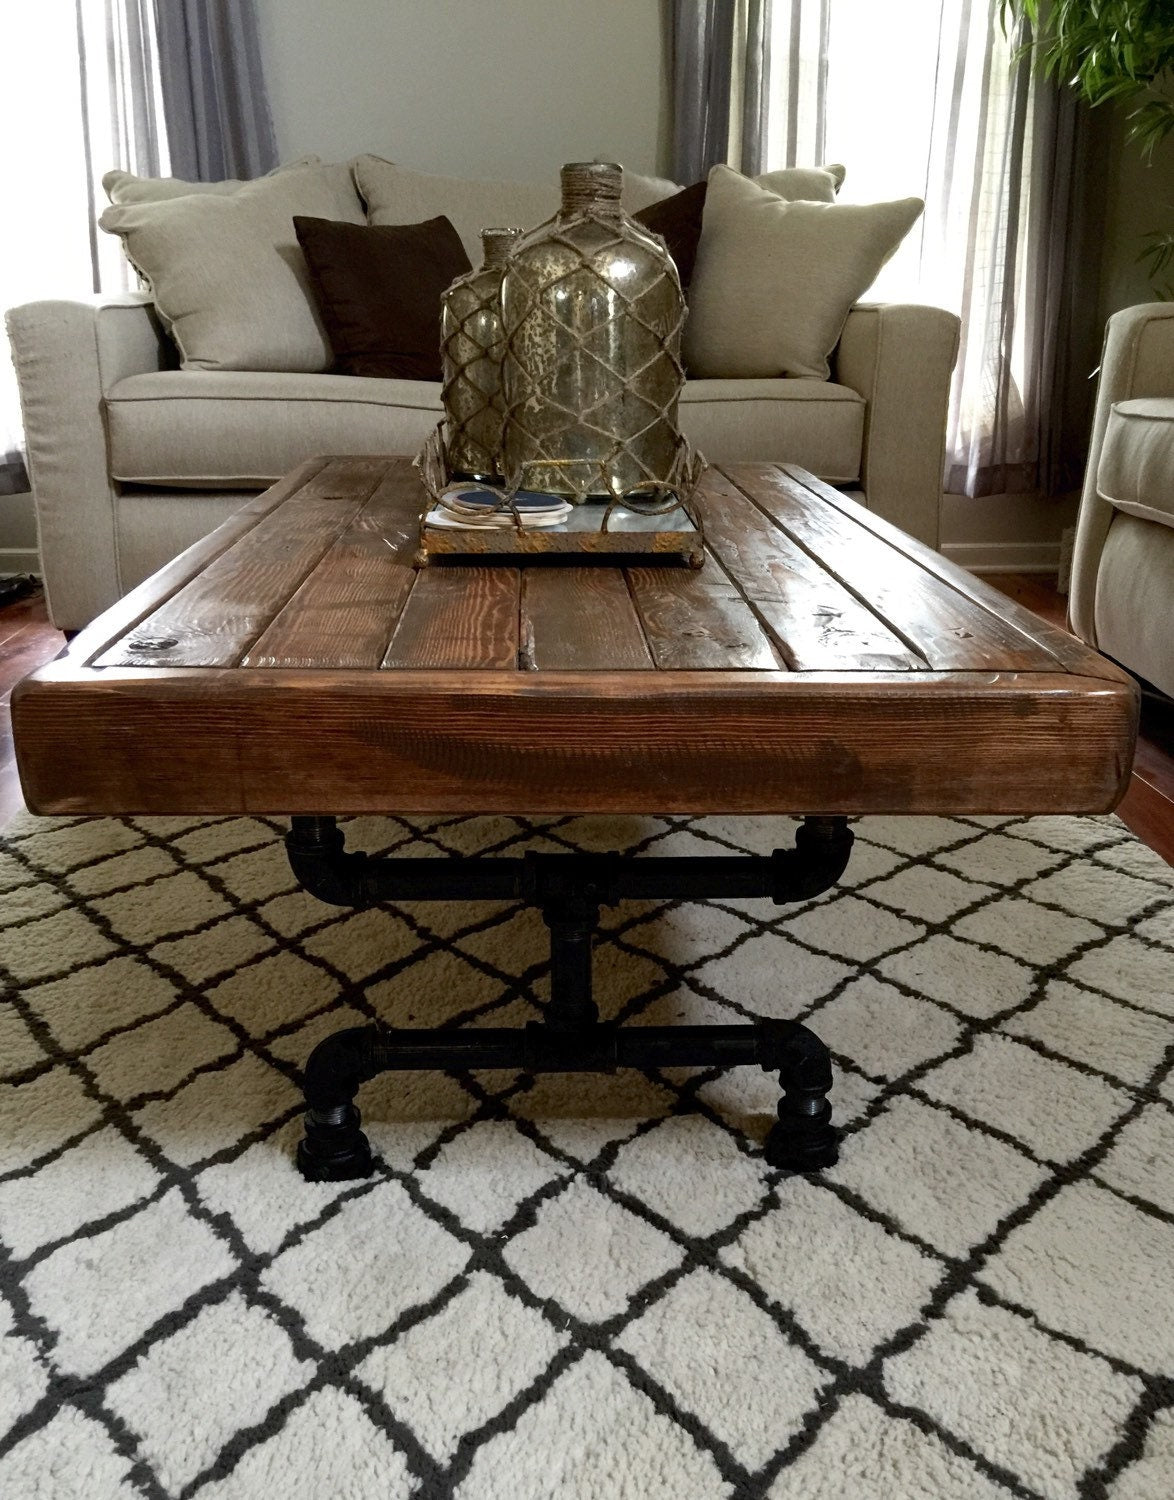 Steel and Pine Wood Weathered Coffee Table